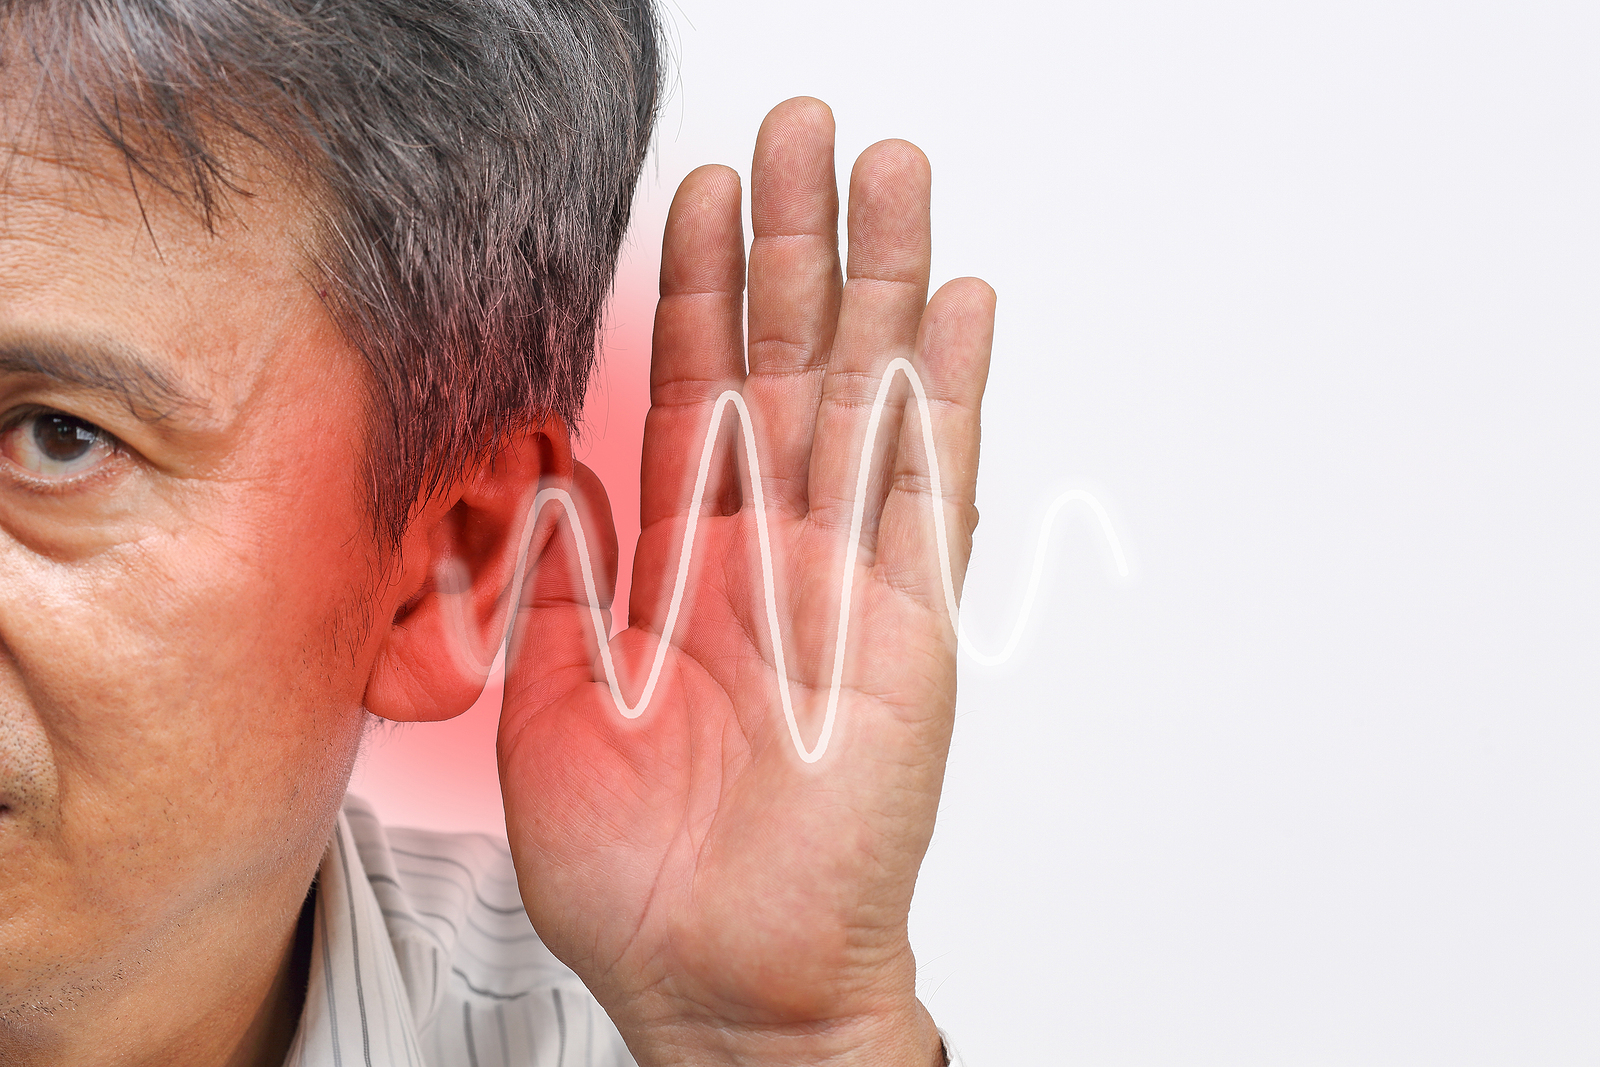 Featured image for “Tips for Managing Tinnitus”